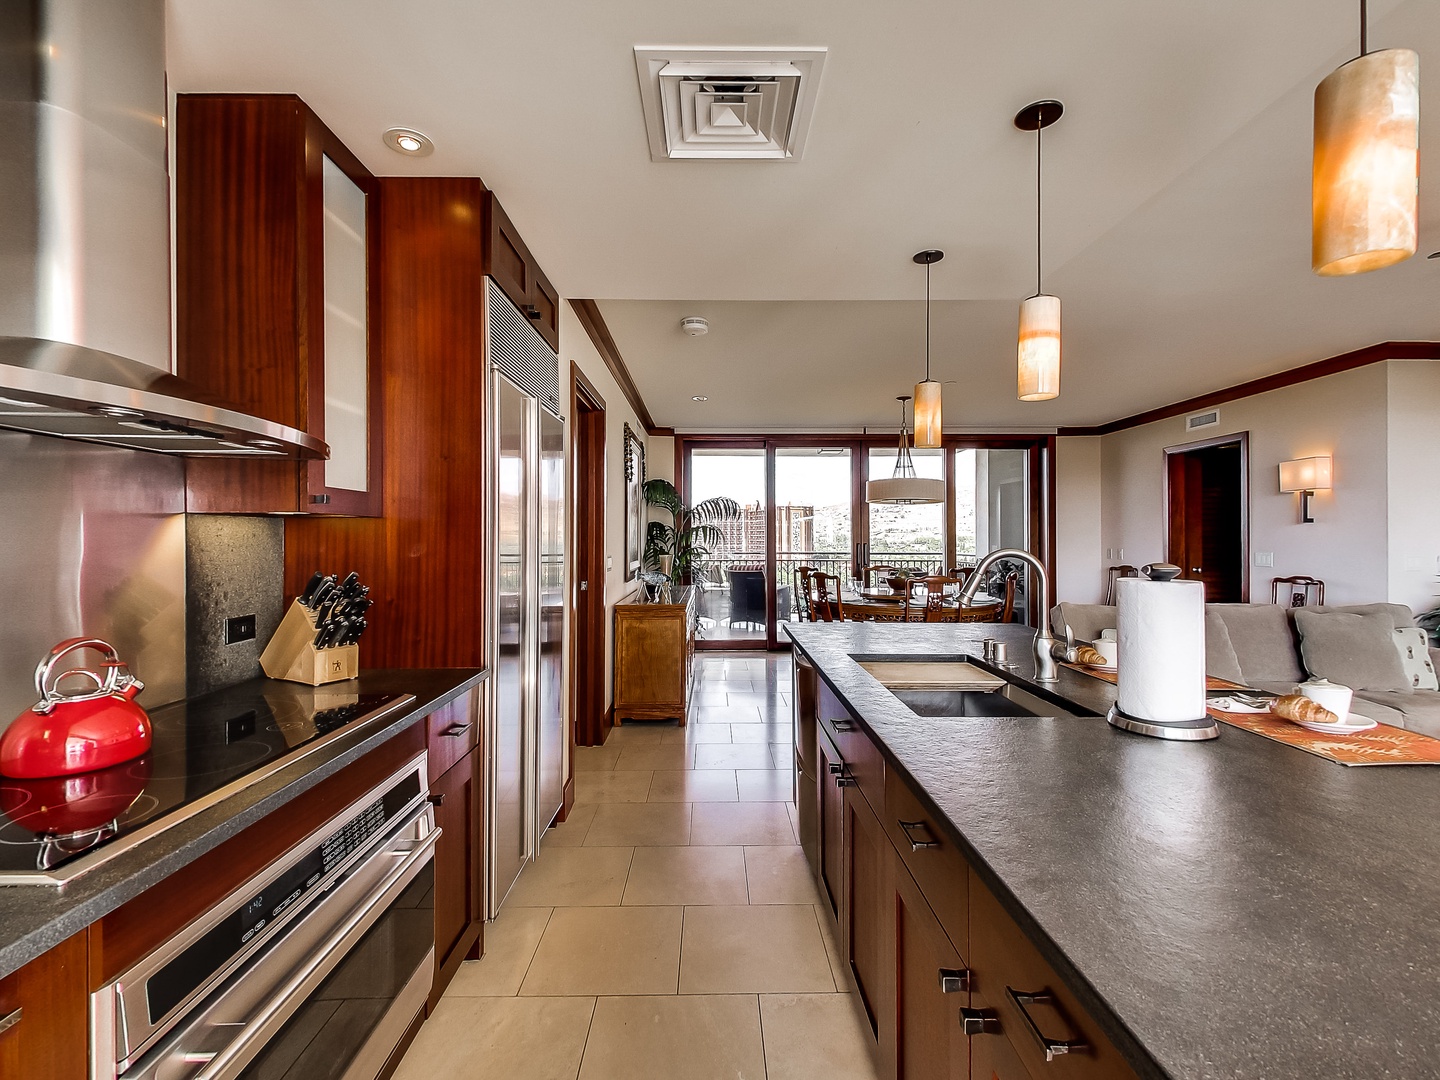 Kapolei Vacation Rentals, Ko Olina Beach Villas O1011 - The open floor plan for the kitchen, dining and living areas provide for easy conversation.